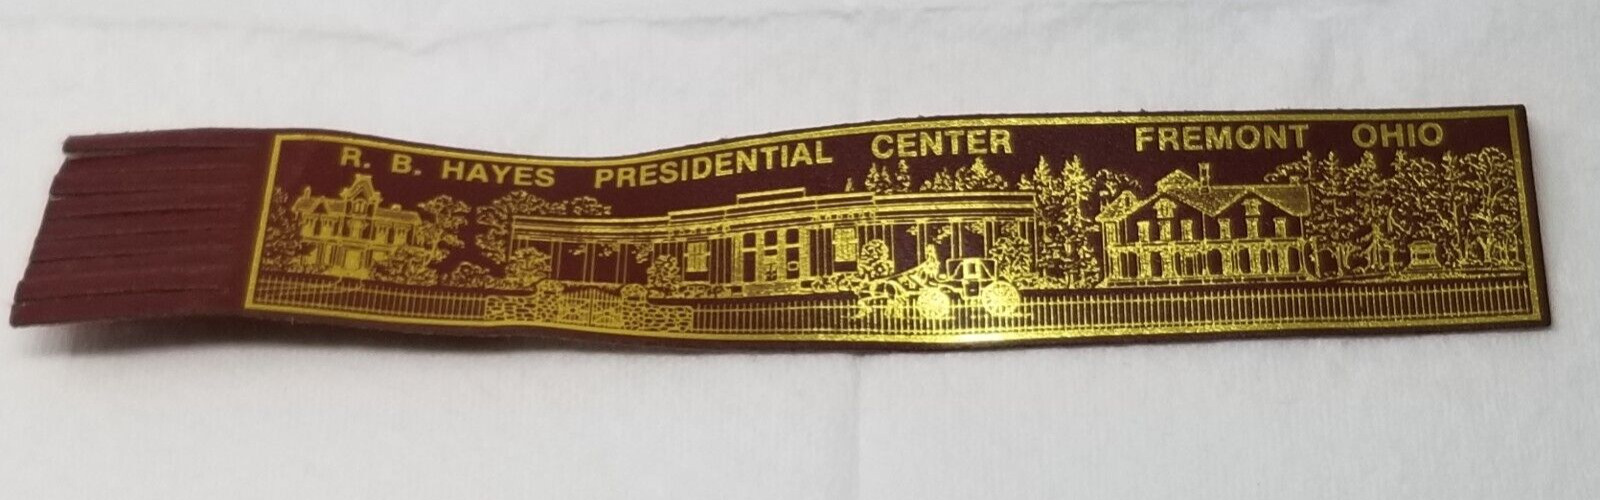 Ruther B. Hayes Presidential Center Leather Bookmark Fremont Ohio